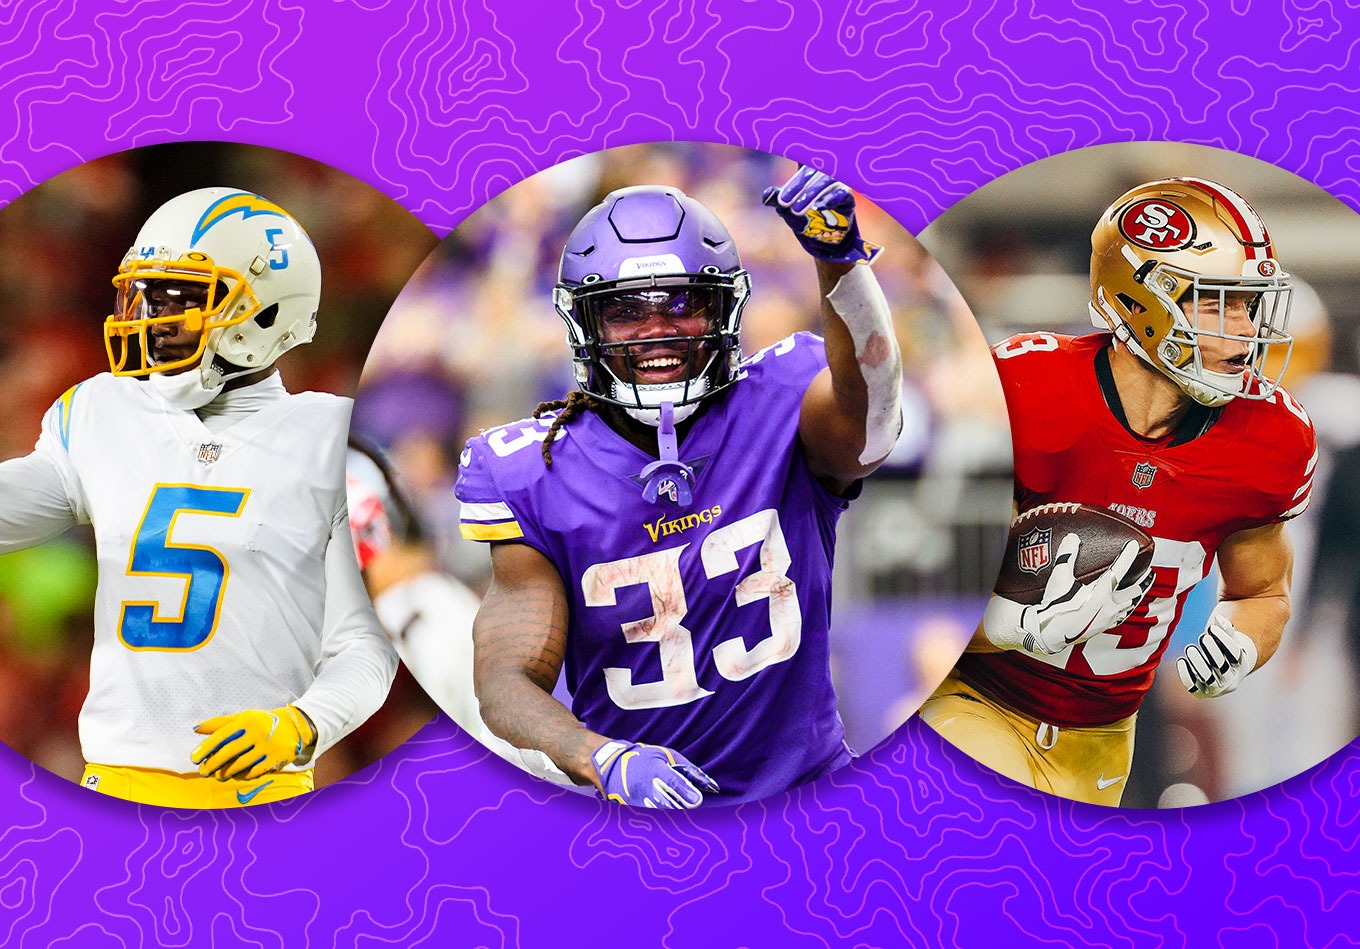 Cover 3: The Vikings Get Another Test, Plus Two Big Divisional Matchups to Watch in Week 11